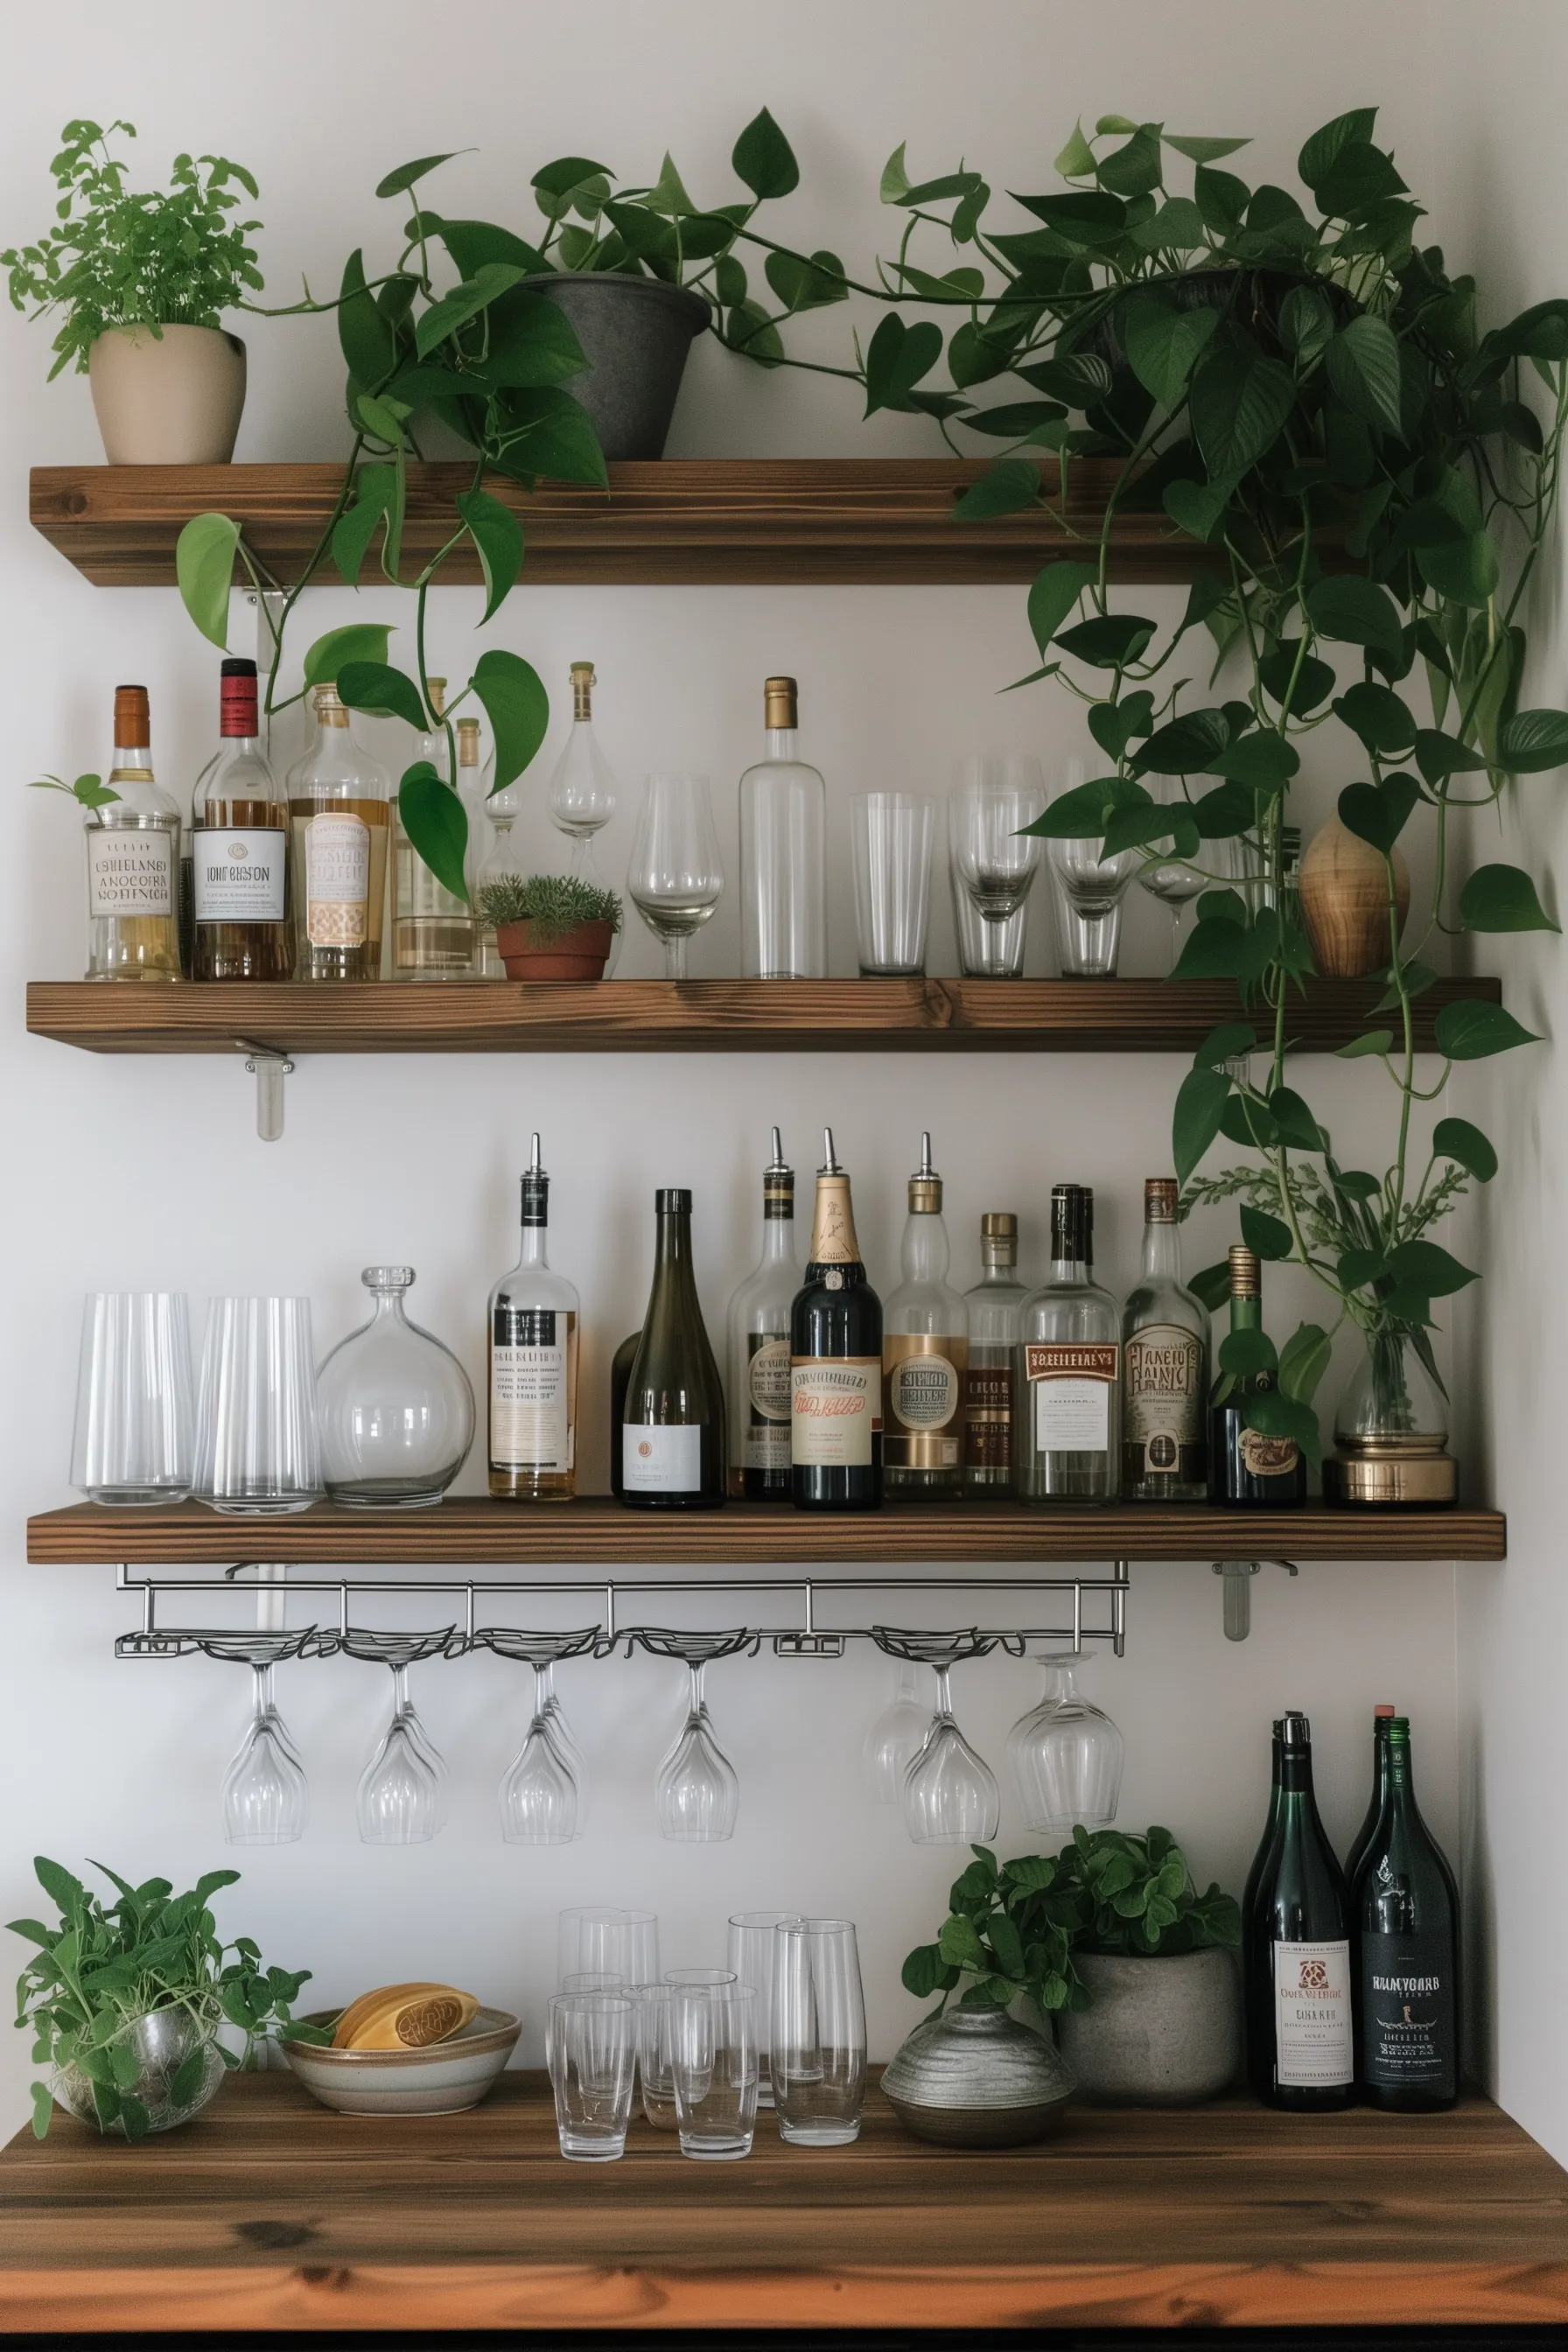 A bar shelf with integrated planters